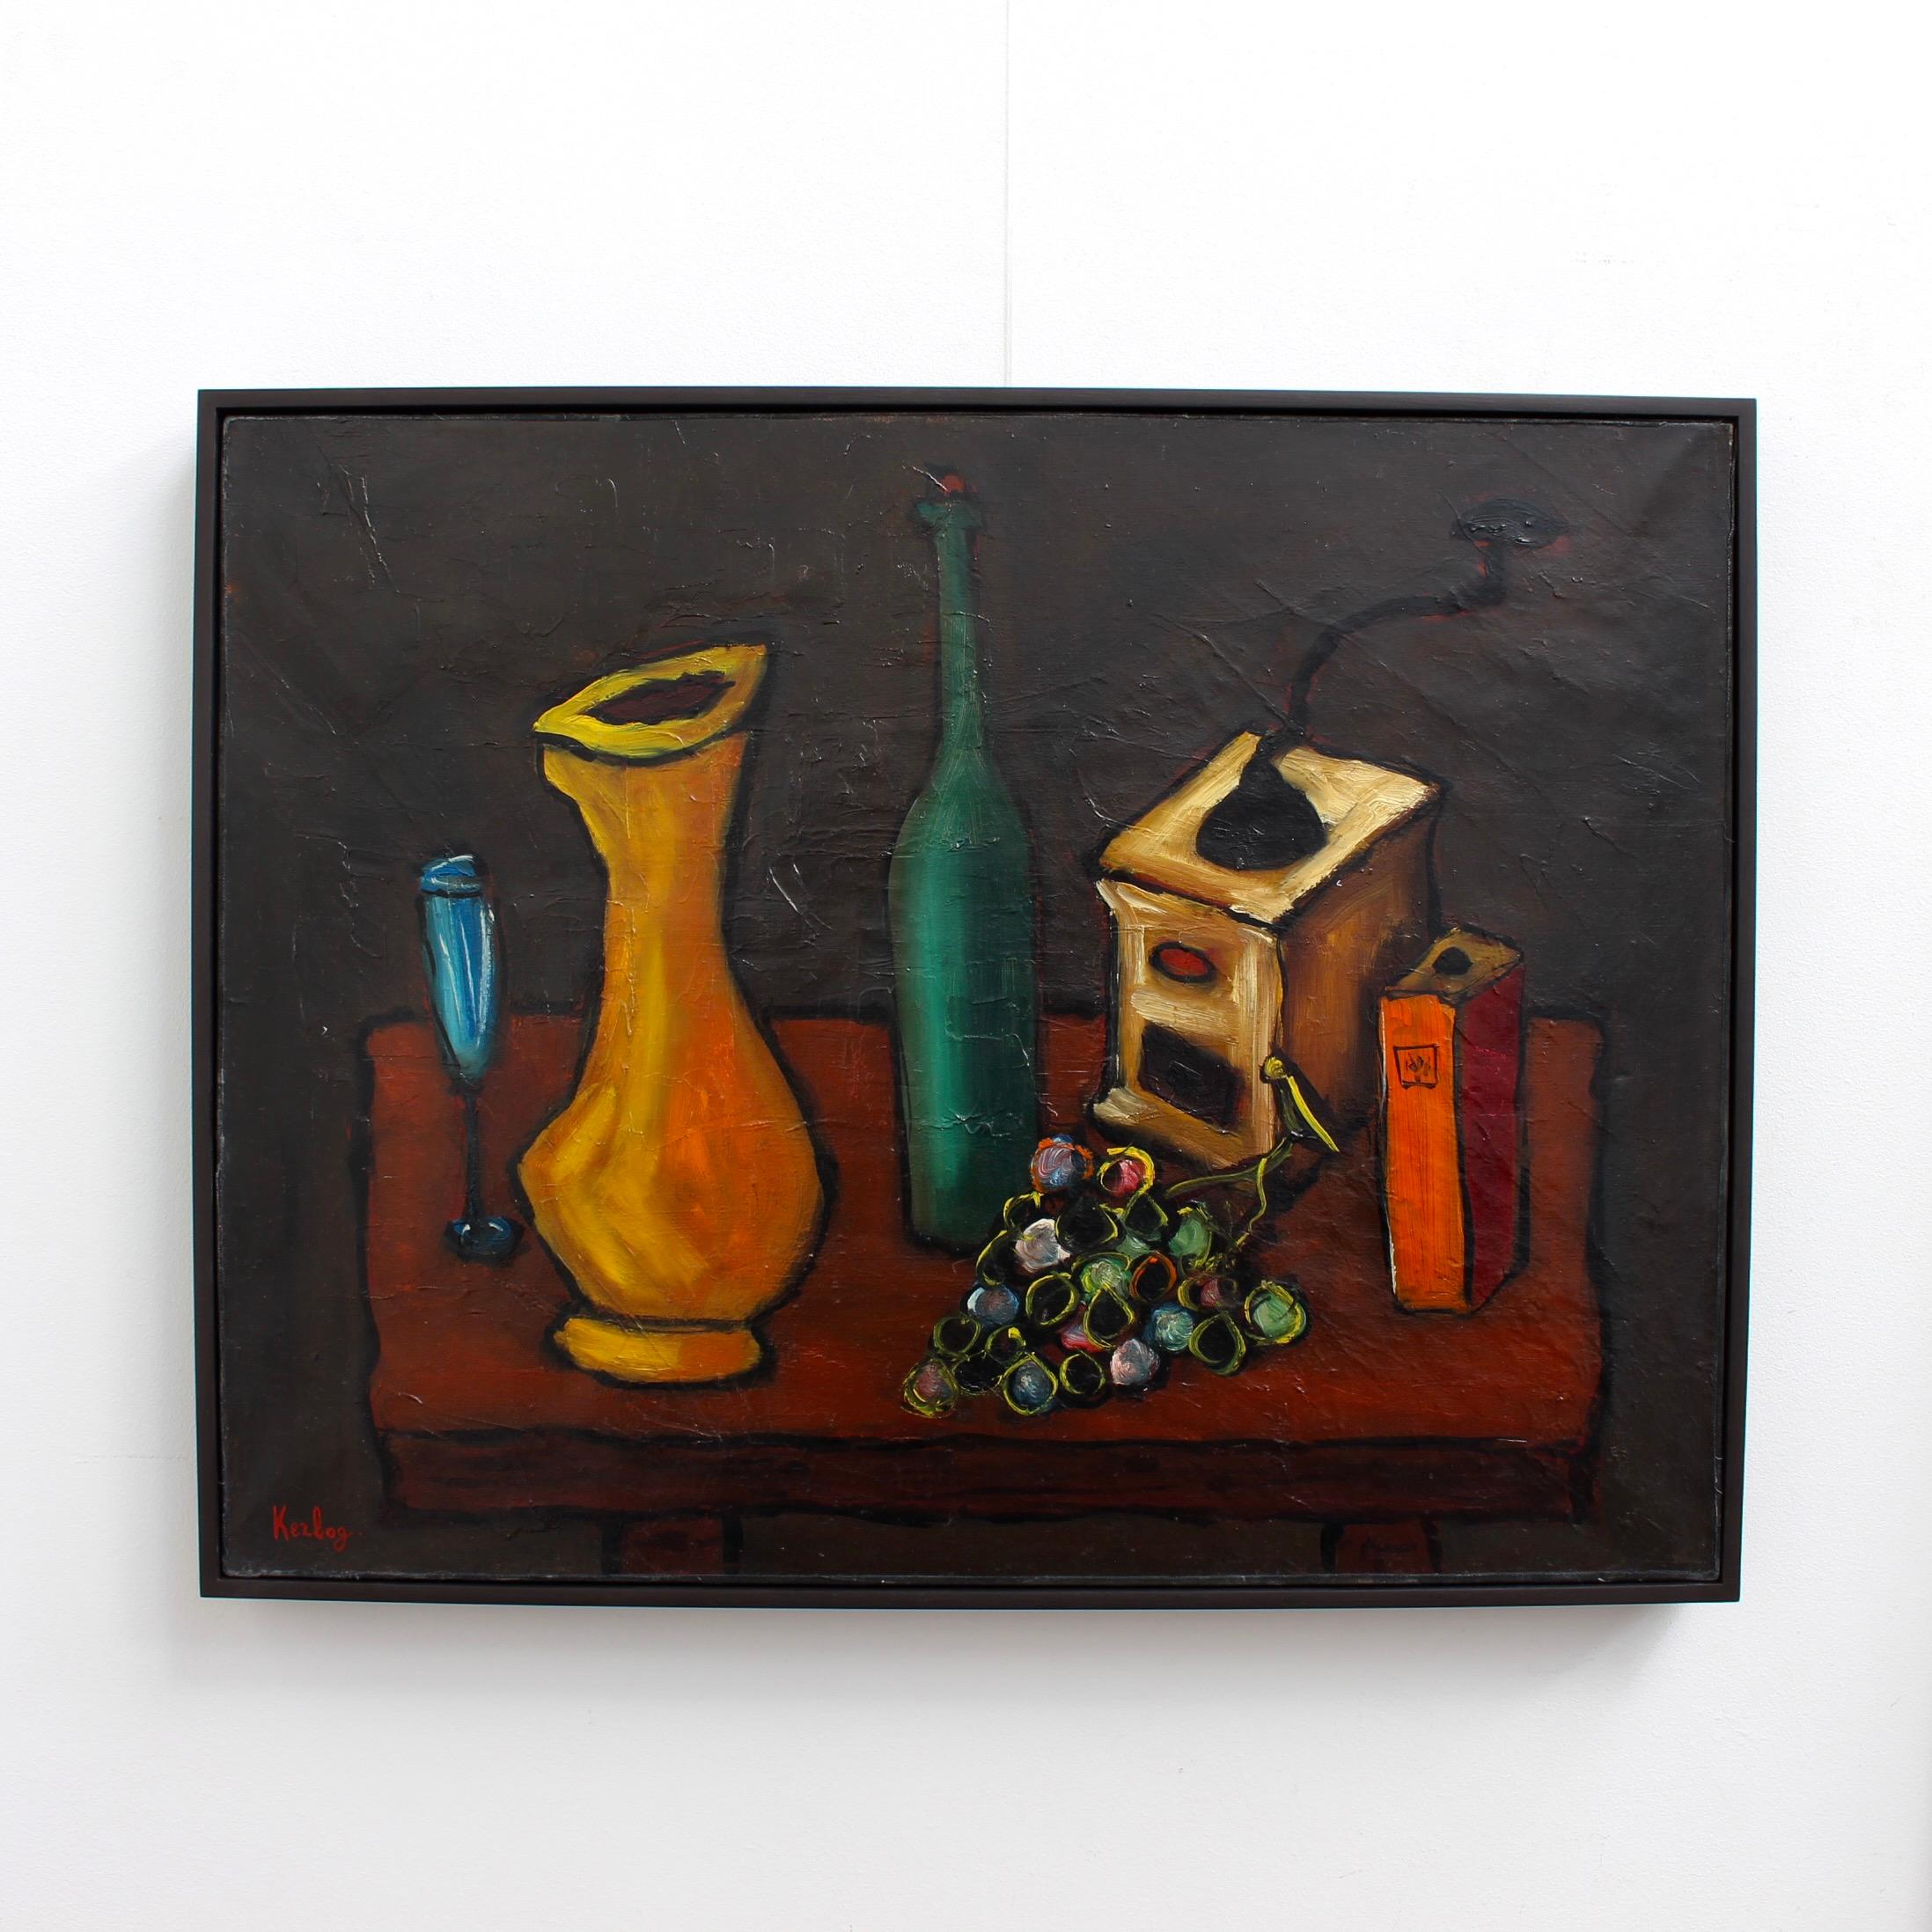 'Still Life with Grapes', oil on canvas, French School, signed 'Kerlog' (circa 1950s). A naively charming still life with vibrant colours and harmonious arrangement. The dark background prods the form and colour forward creating a sense of depth in